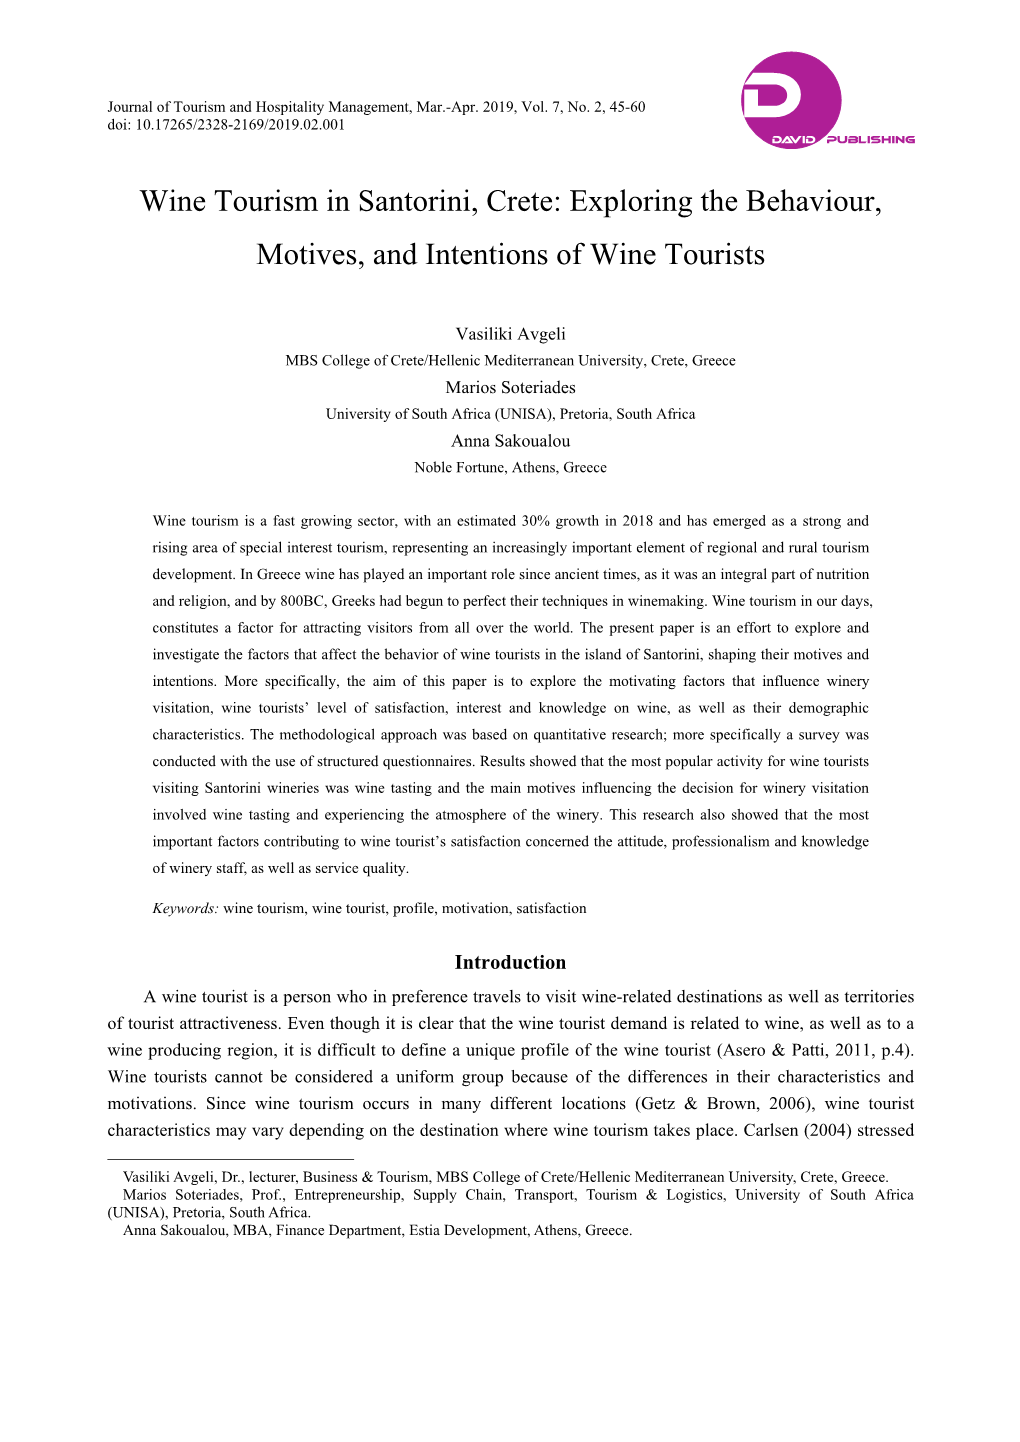 Wine Tourism in Santorini, Crete: Exploring the Behaviour, Motives, and Intentions of Wine Tourists